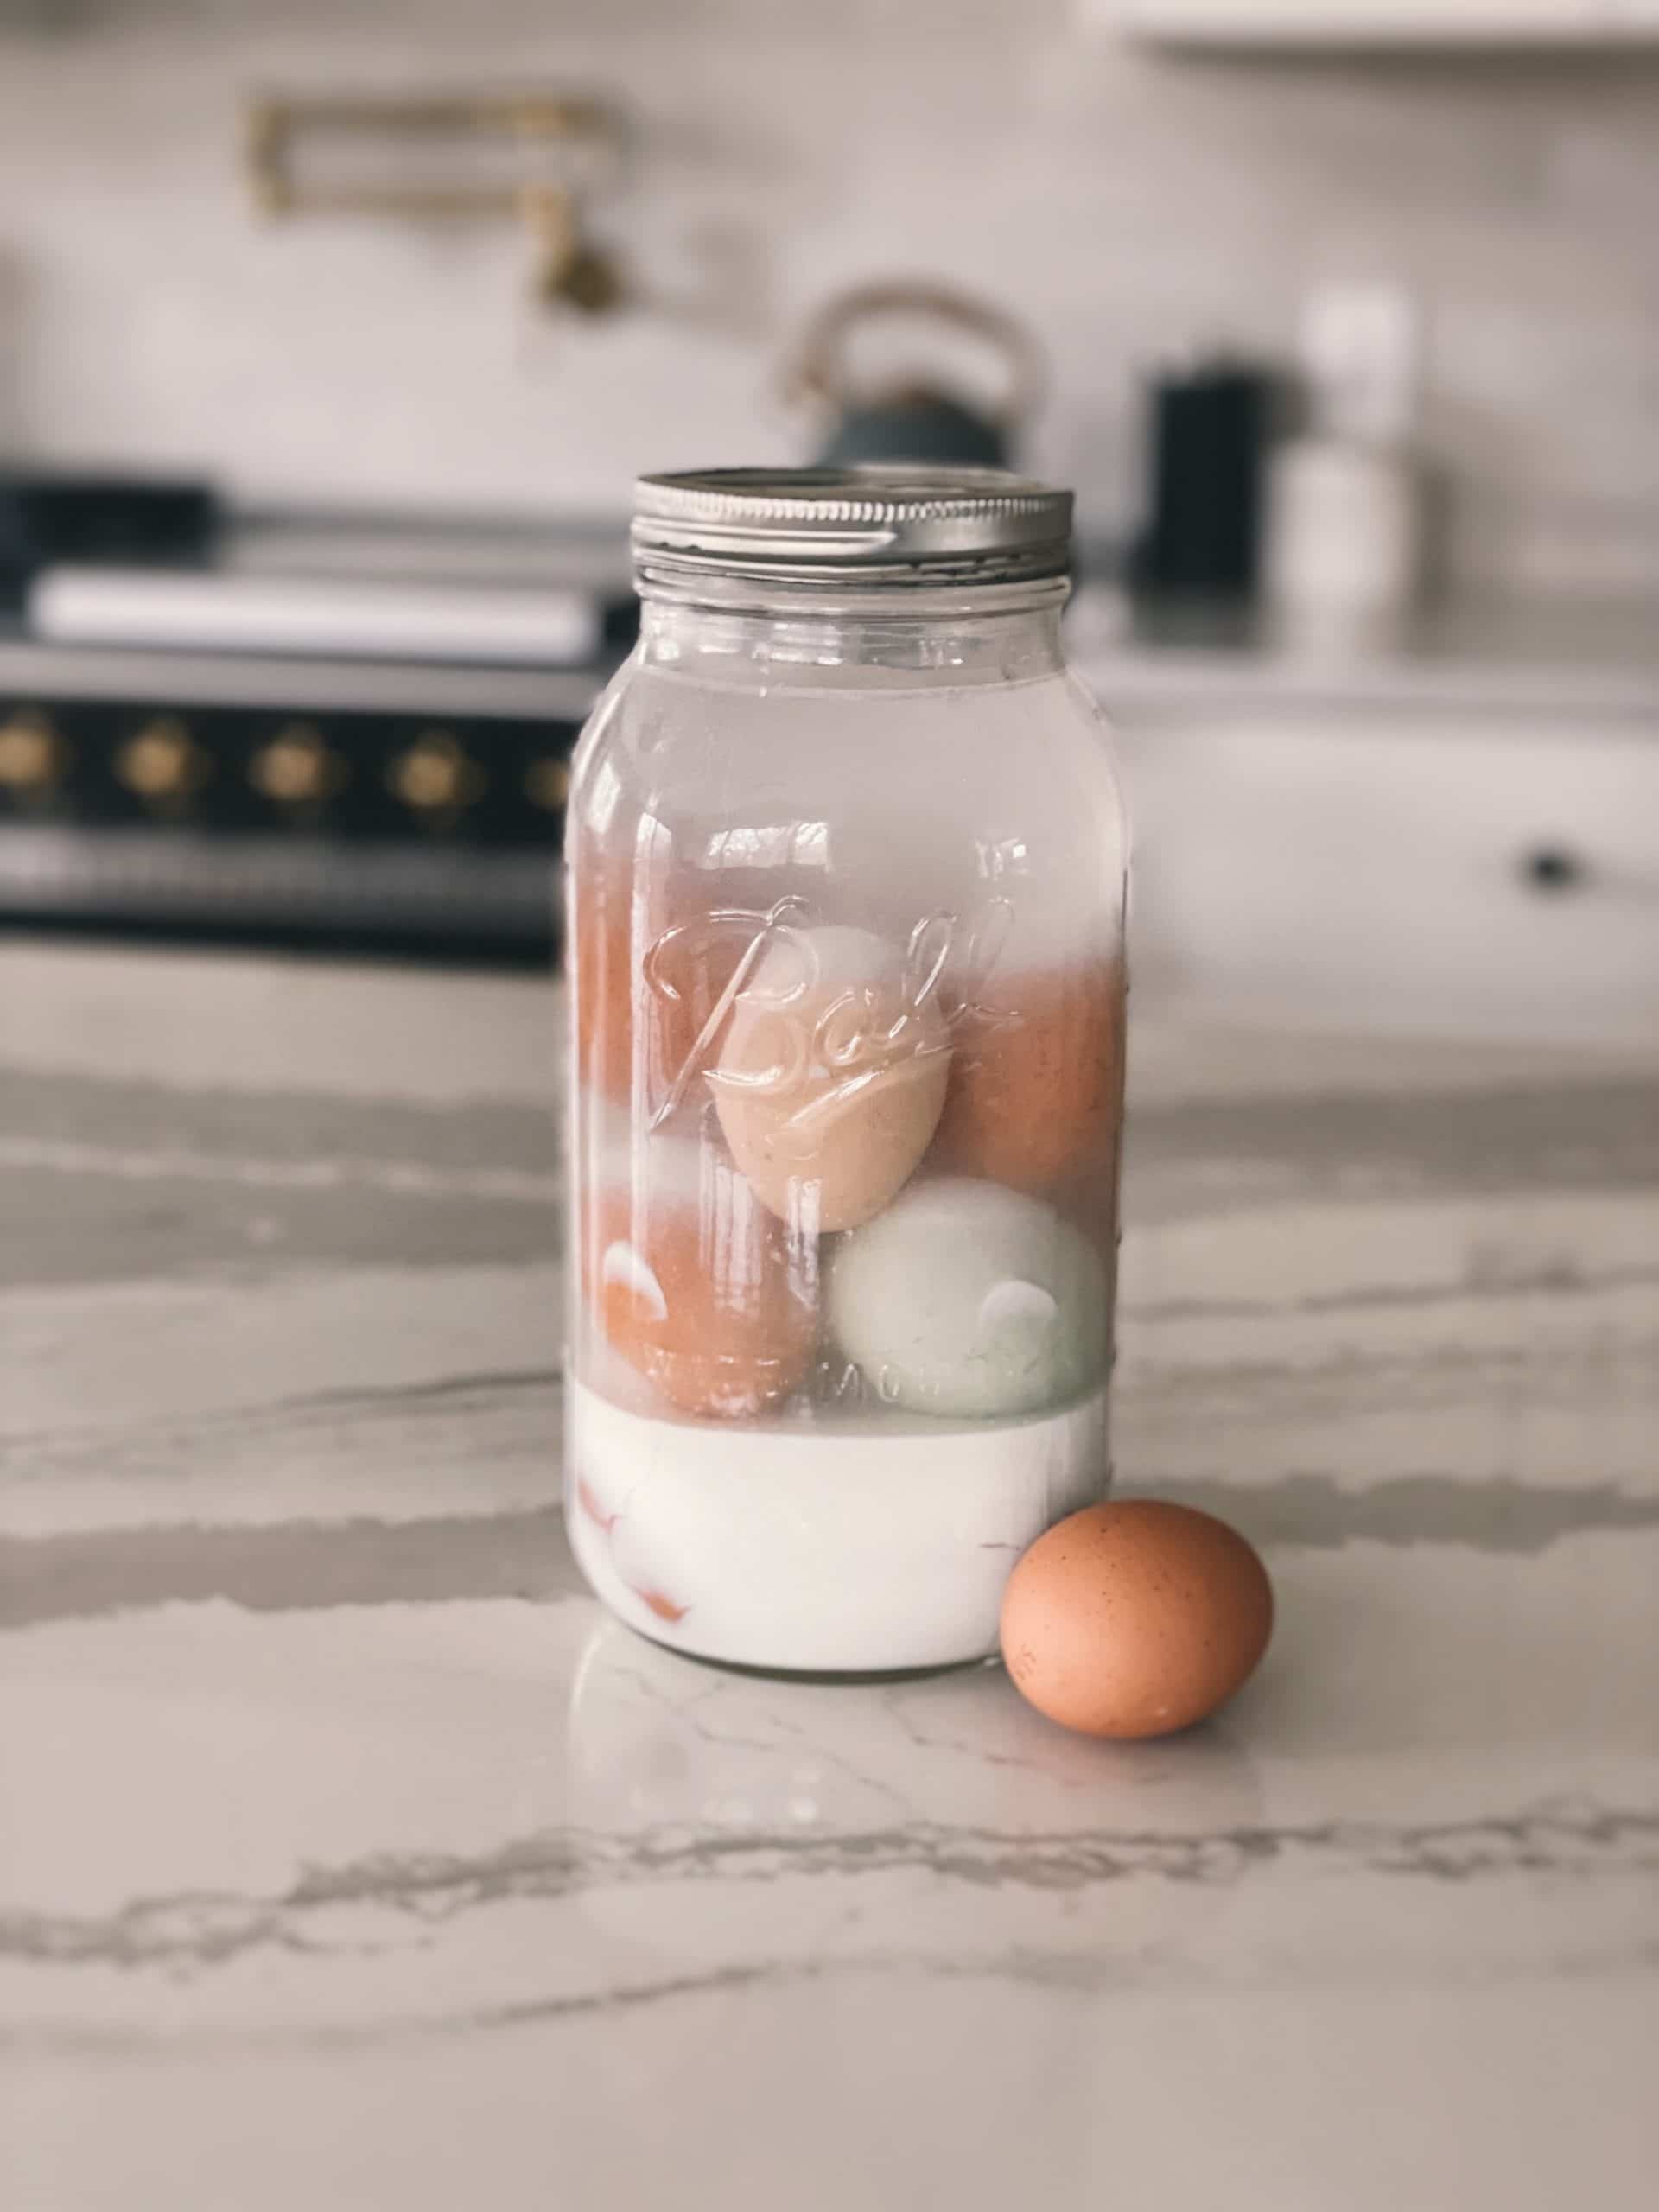 A half gallon glass mason jar filled with eggs and a lime mixture